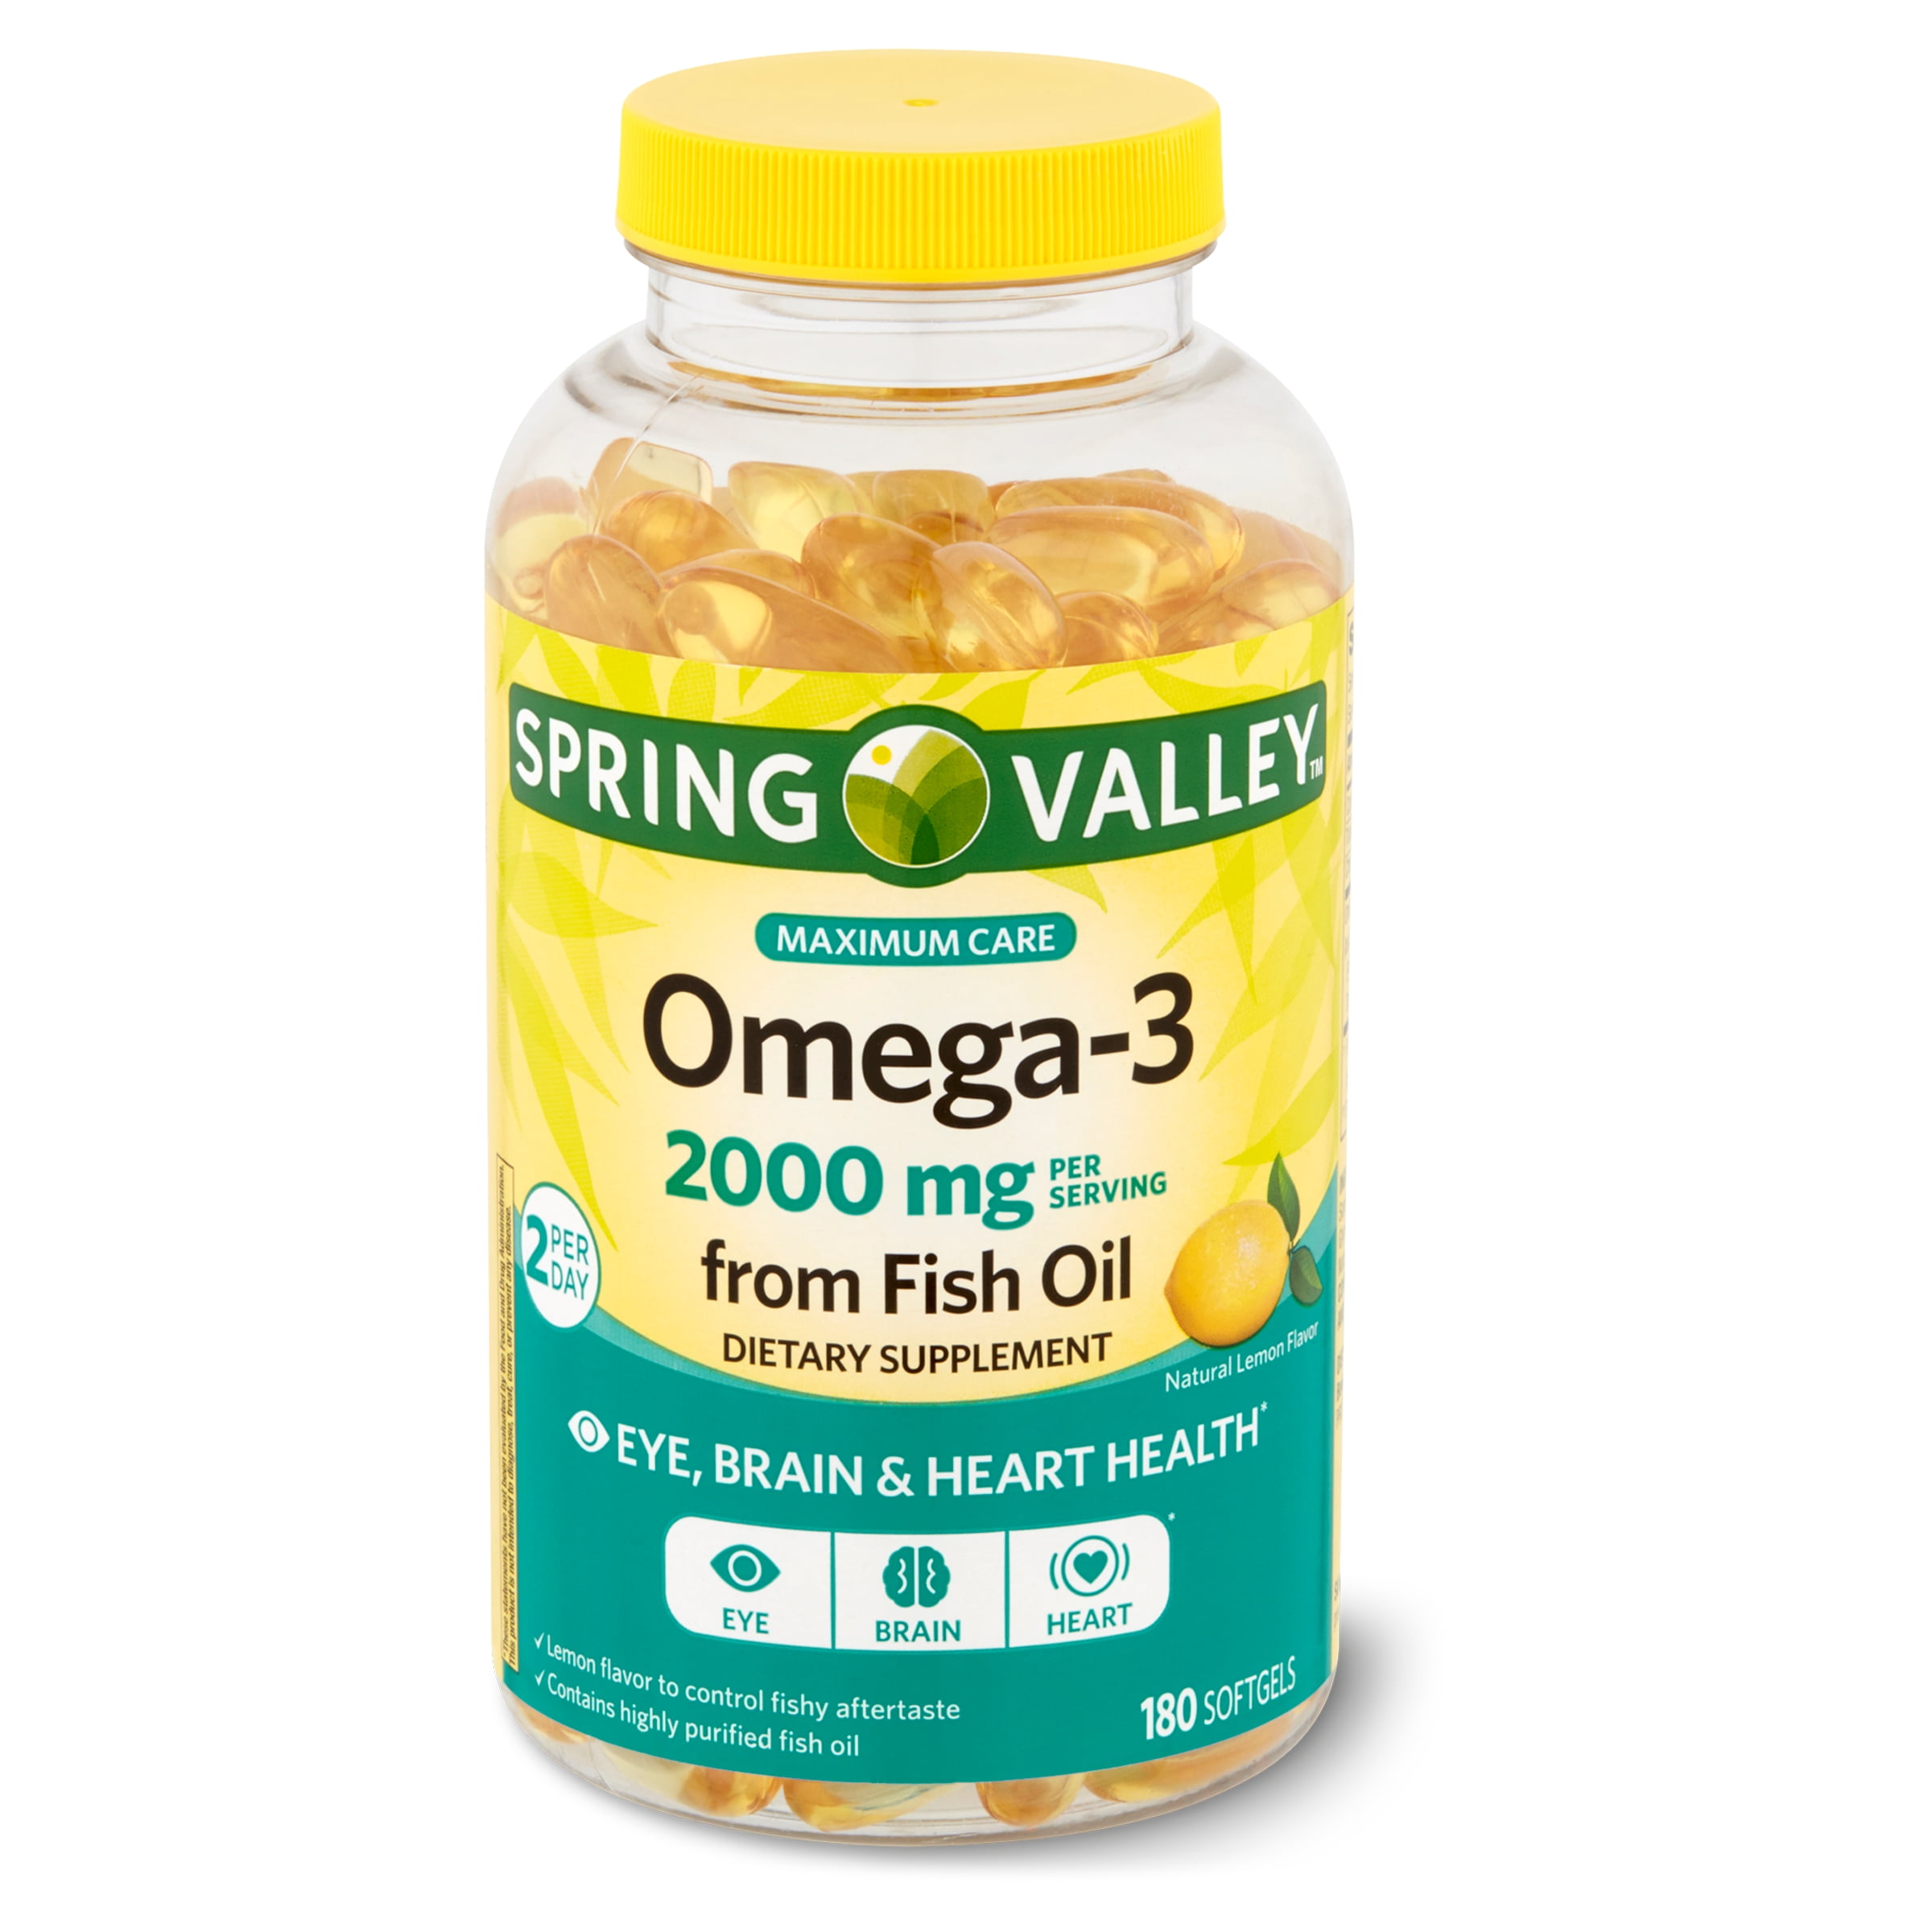 Spring Valley Omega-3 from Fish Oil Maximum Care Softgels, 2000mg, 180 Count